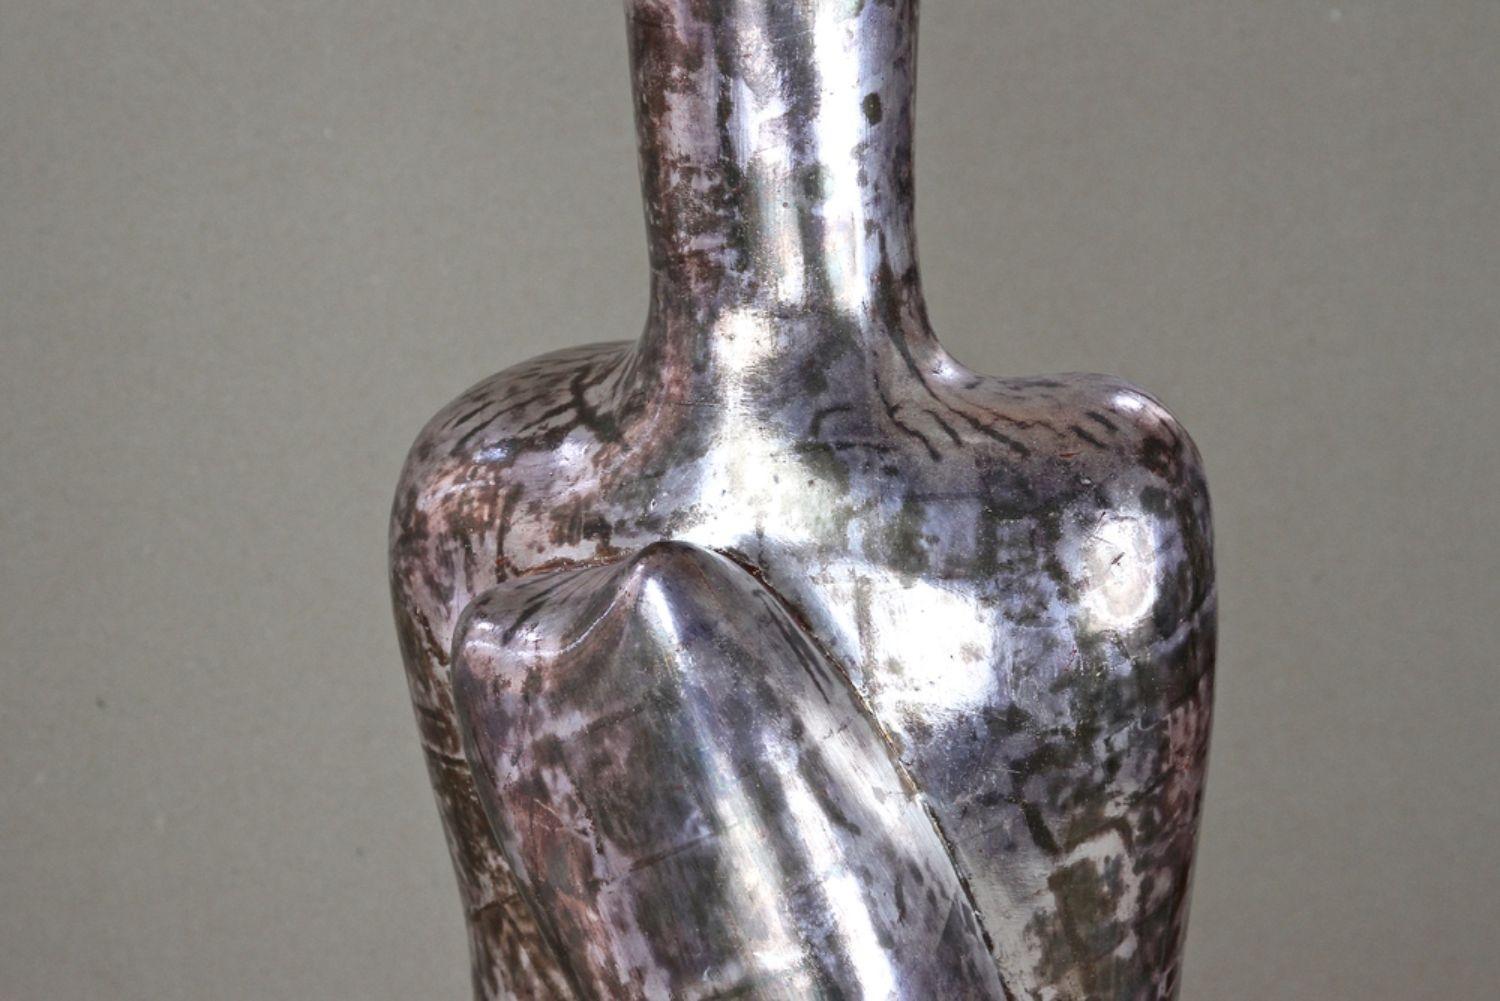 Abstract Contemporary Silvered Sculpture by M. Treml, Handcarved, Austria 2018 For Sale 6